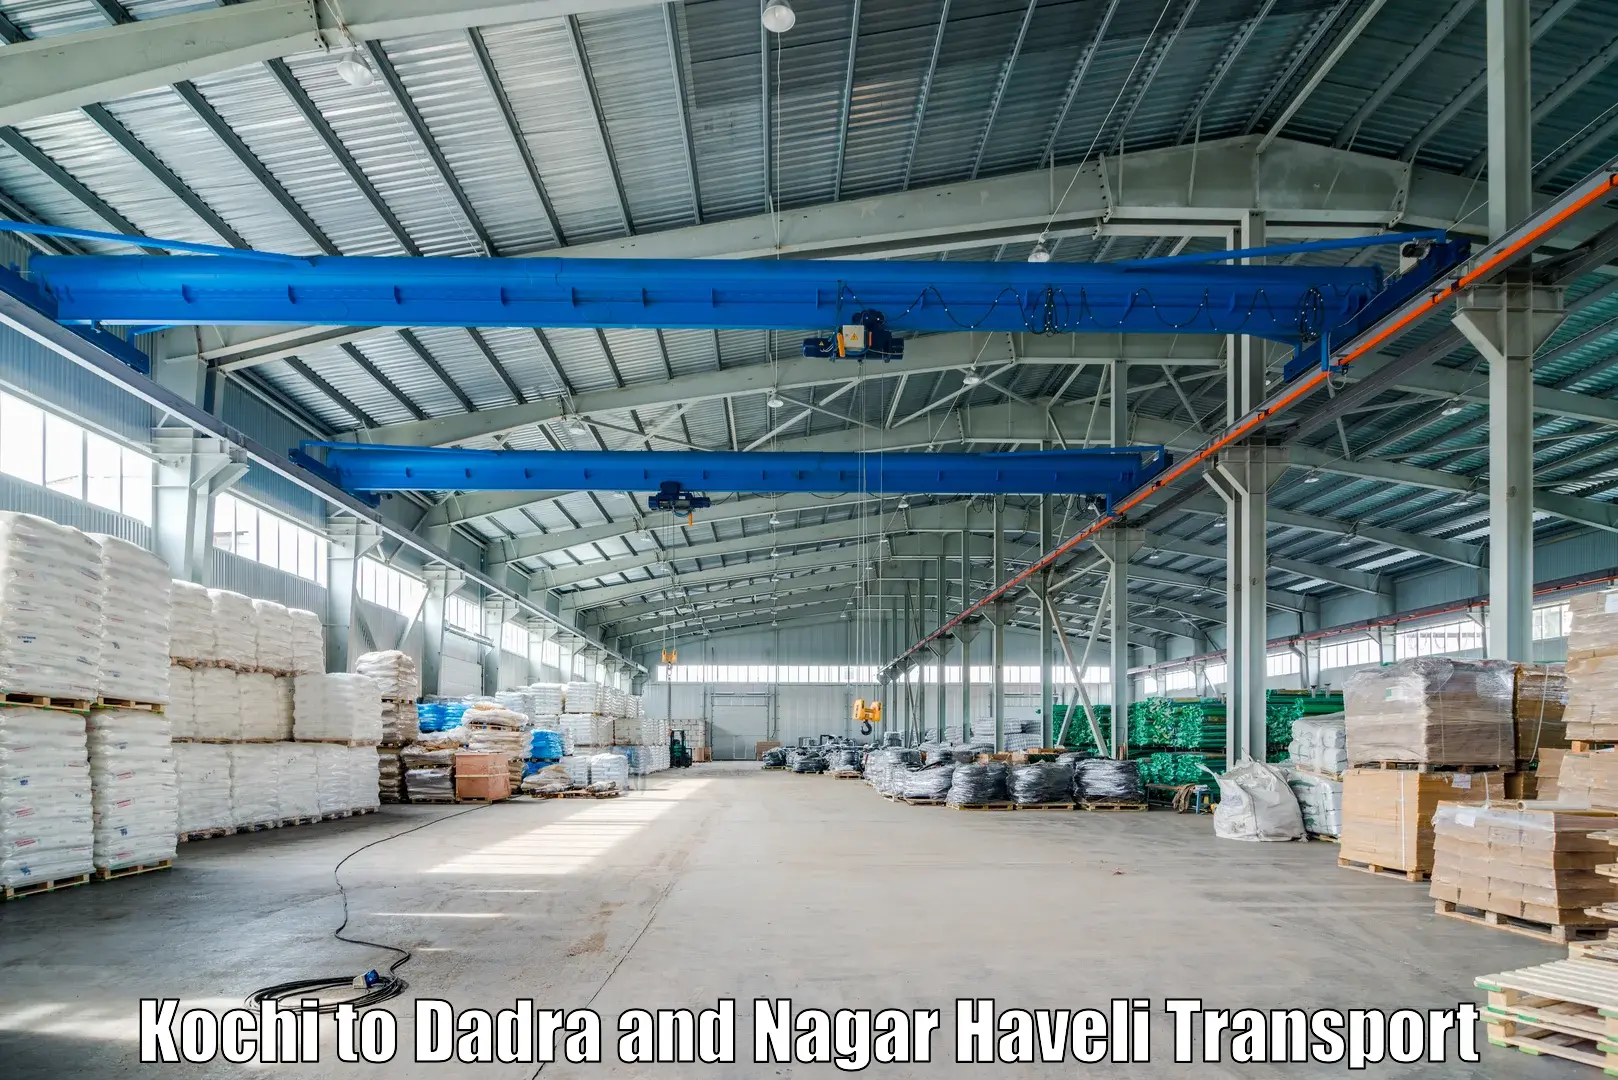 Air freight transport services in Kochi to Dadra and Nagar Haveli